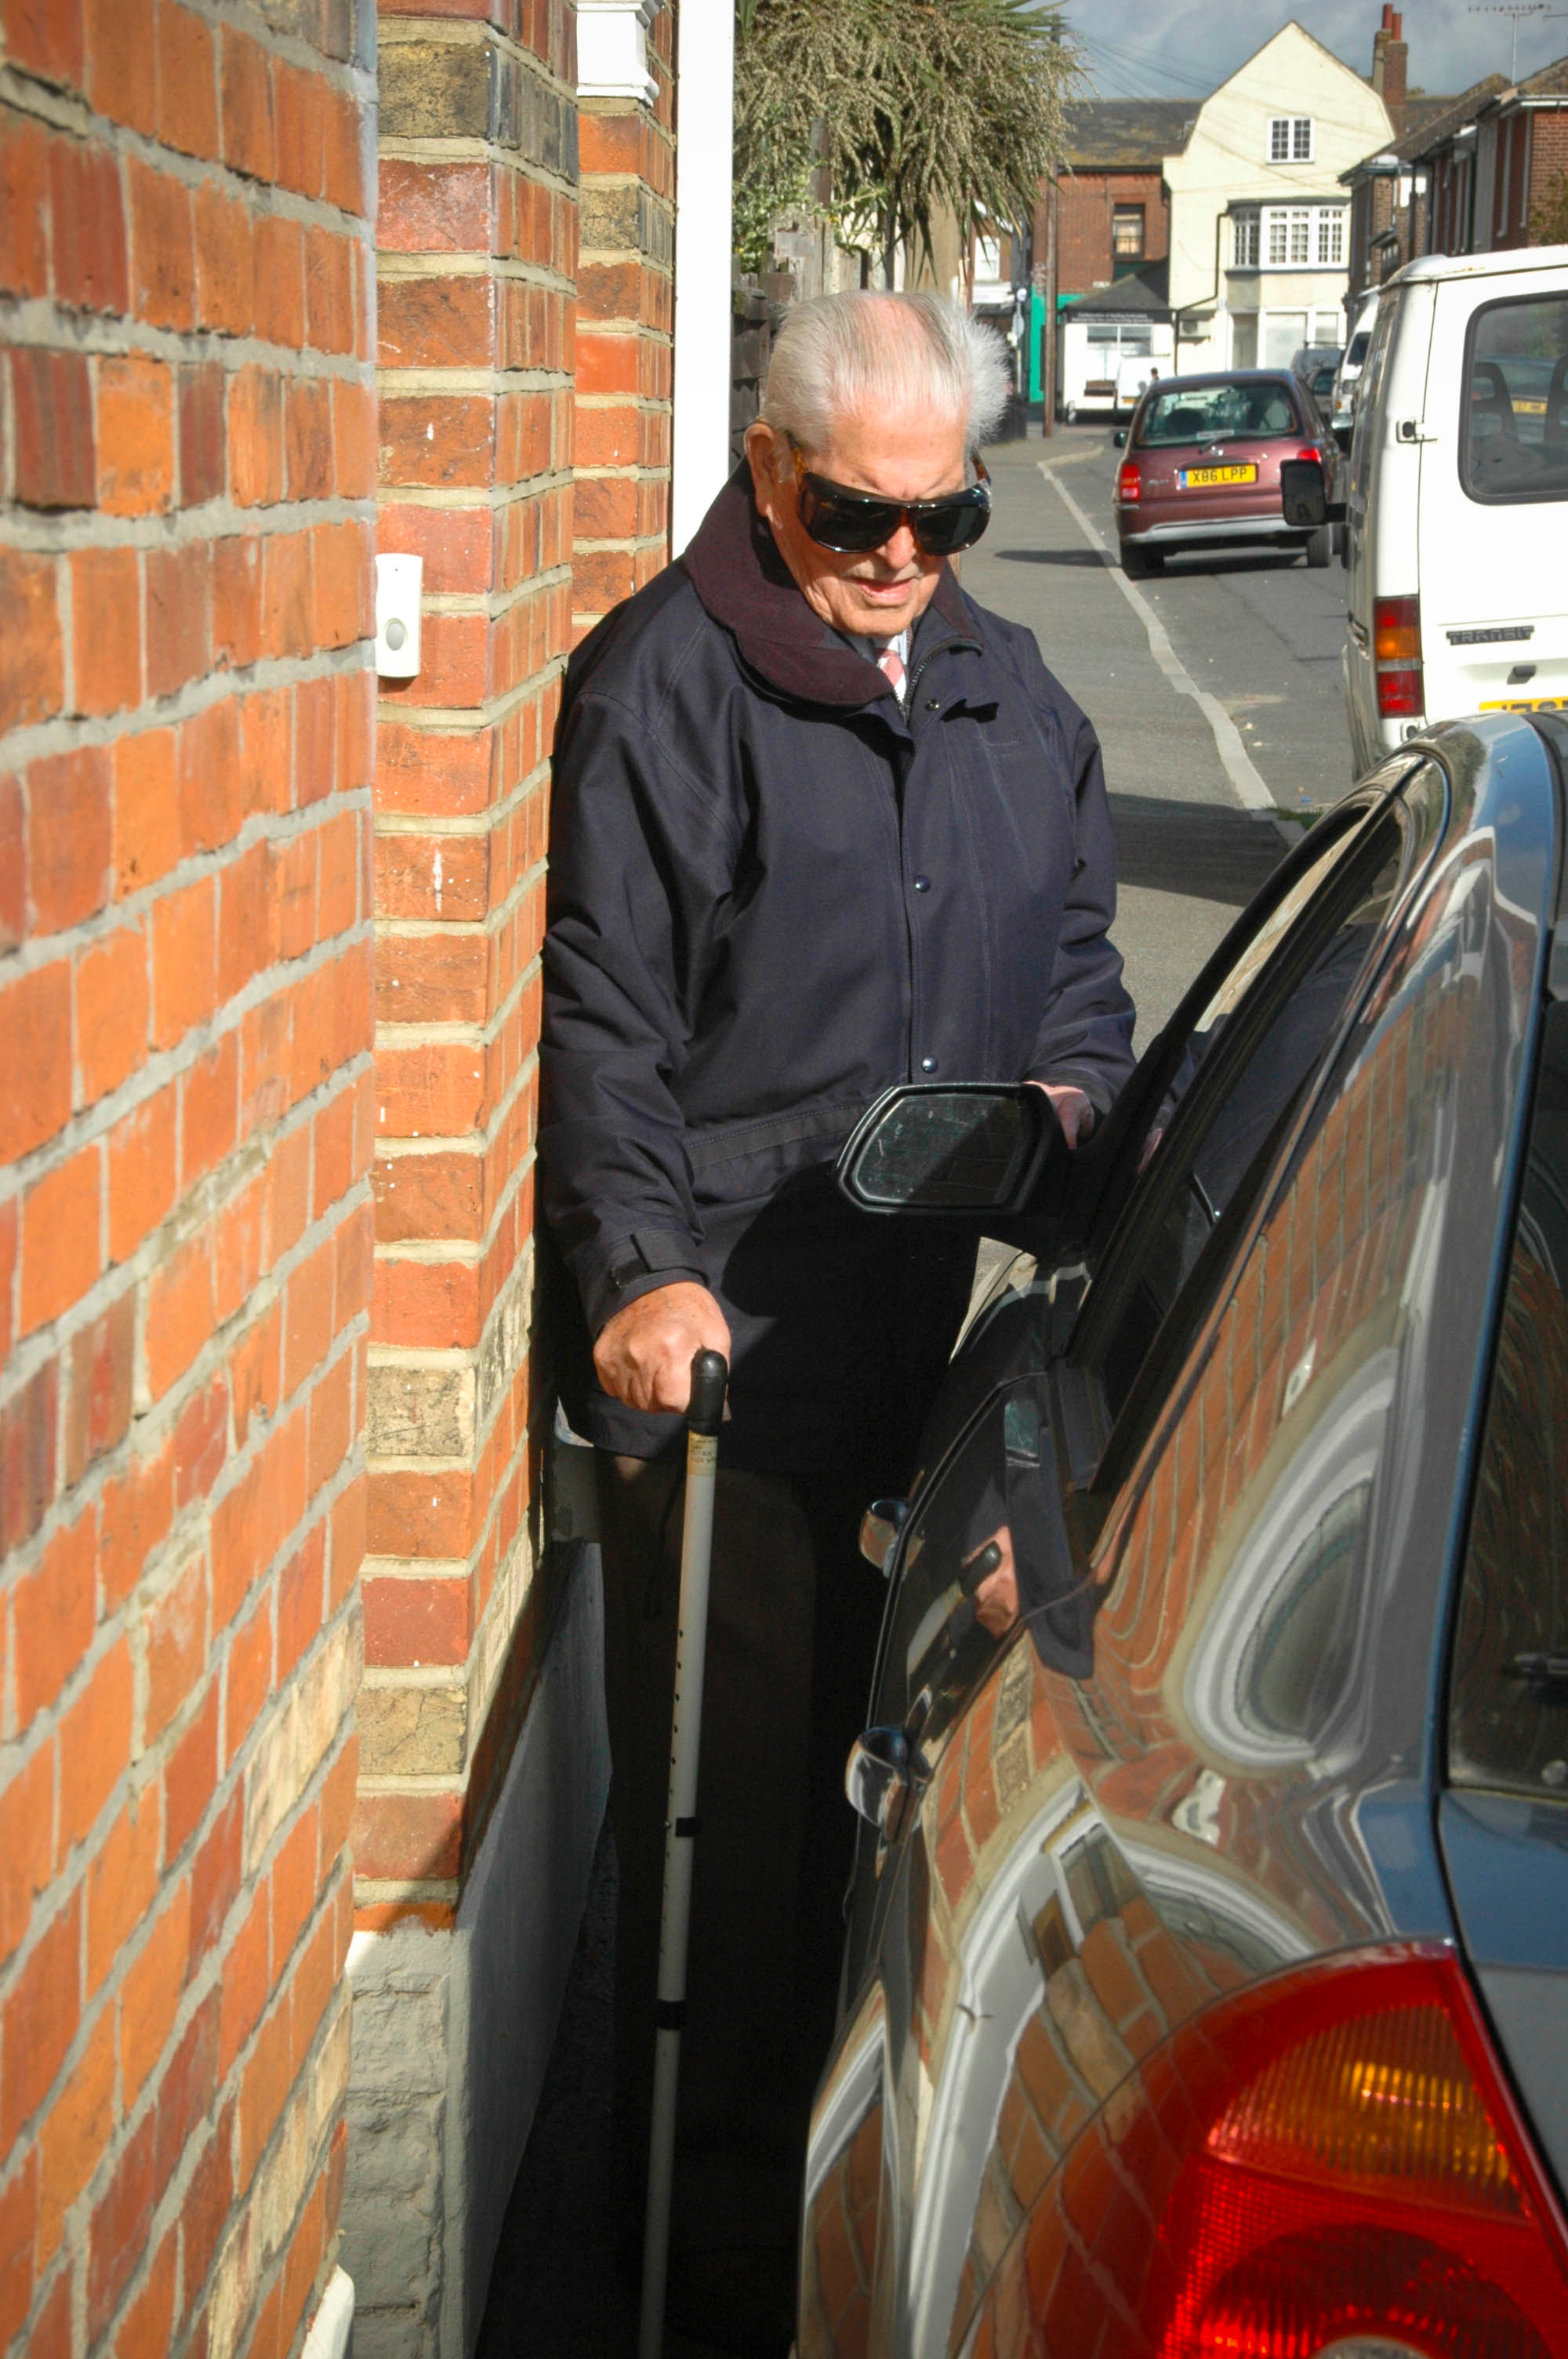 Car parked on the pavement forcing a man to squeeze past